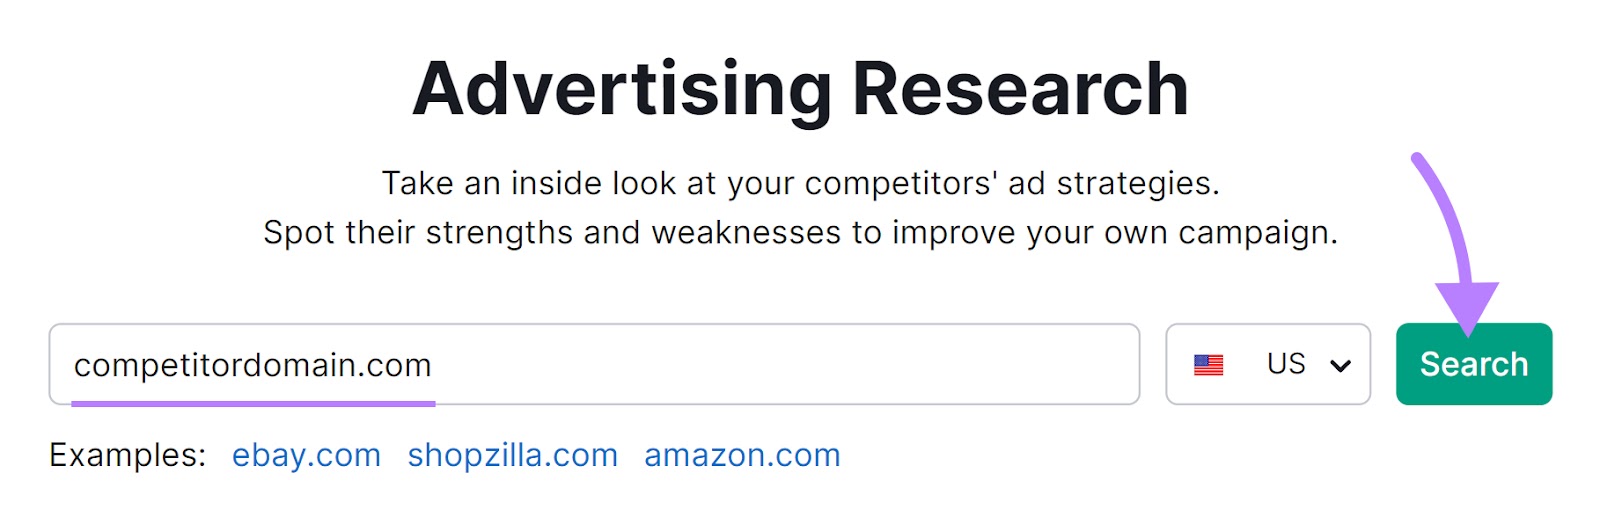 Advertising Research search